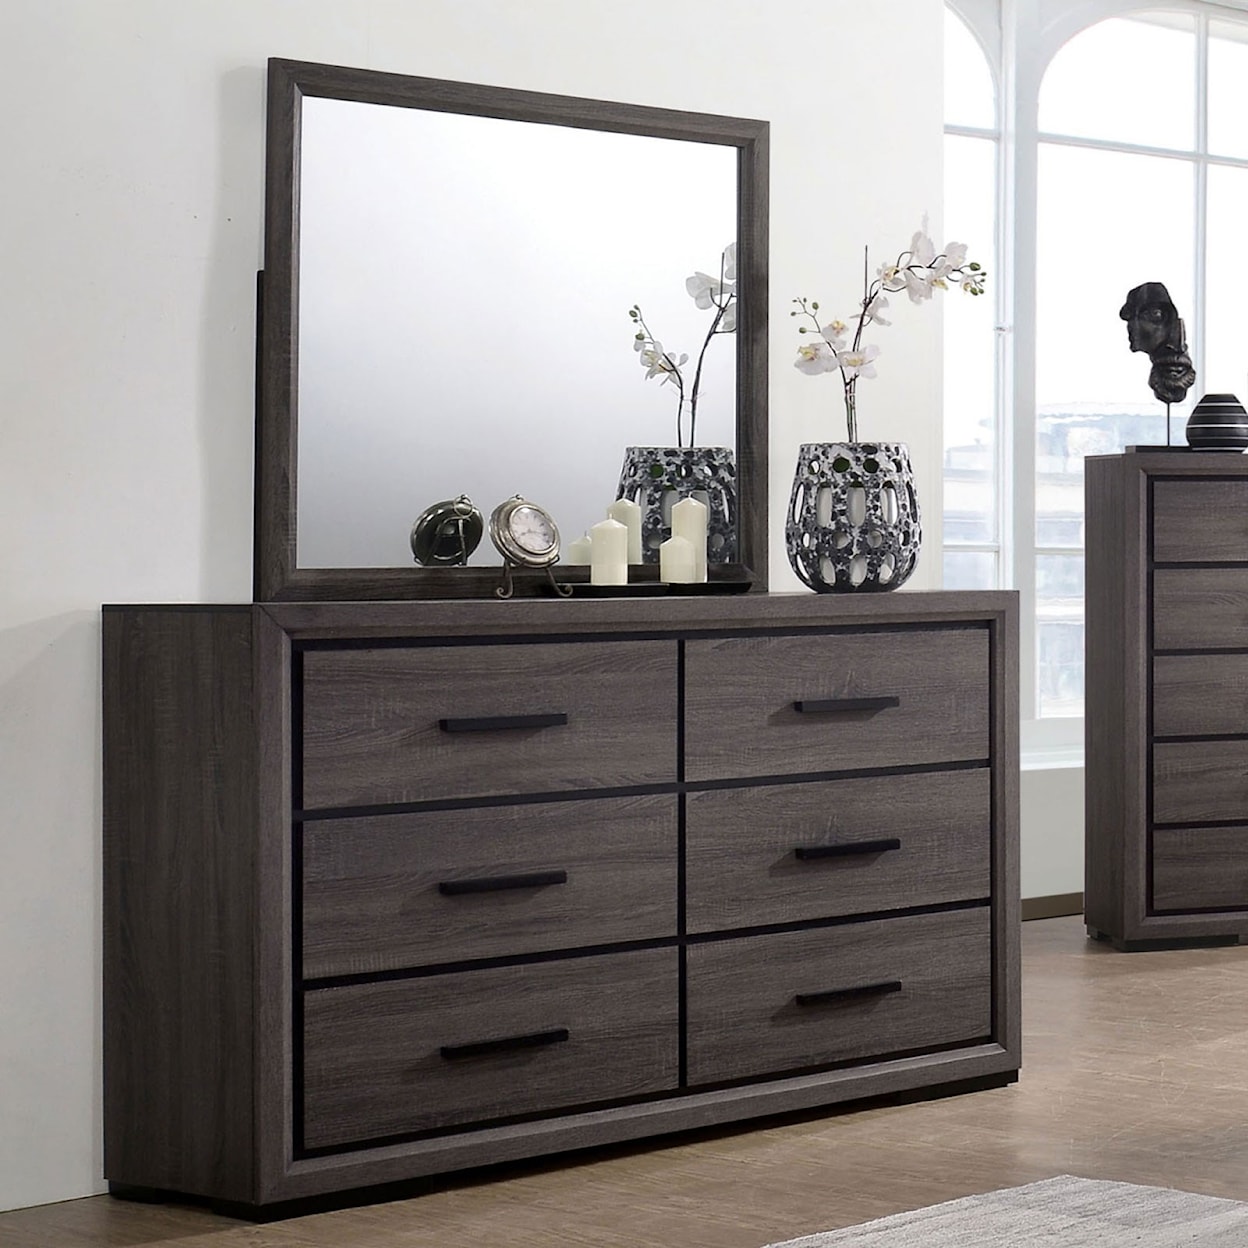 Furniture of America Conwy Dresser and Mirror Combination